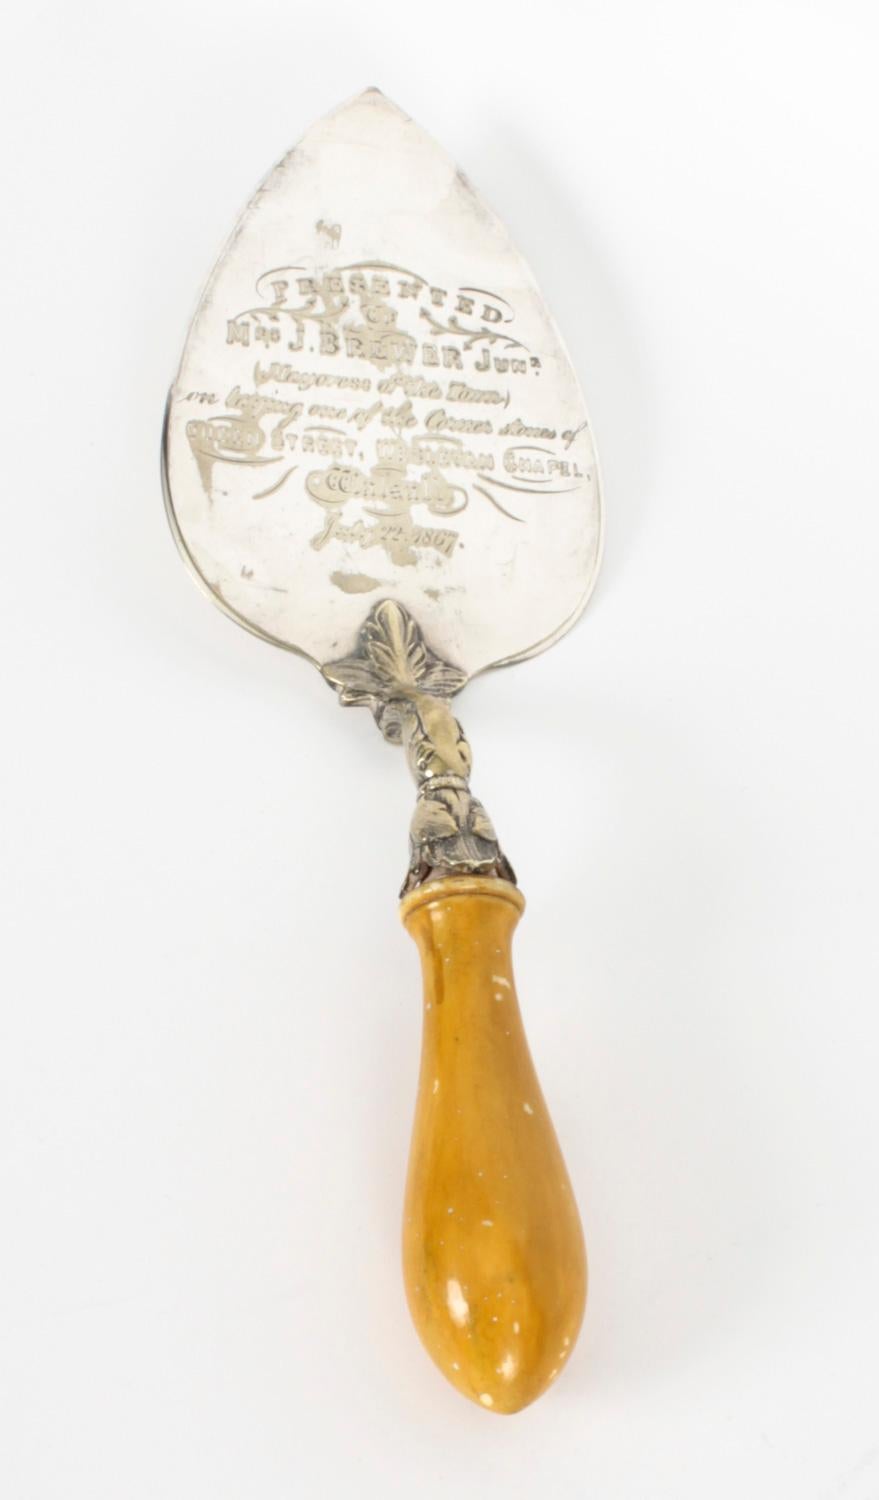 This is a fabulous Victorian silver plated Trowel, dated 1867 in date.

The spade shaped trowel has been superbly engraved with a dedication to a Church corner stone laying ceremony. The handle is very ornate with a vacant beaded